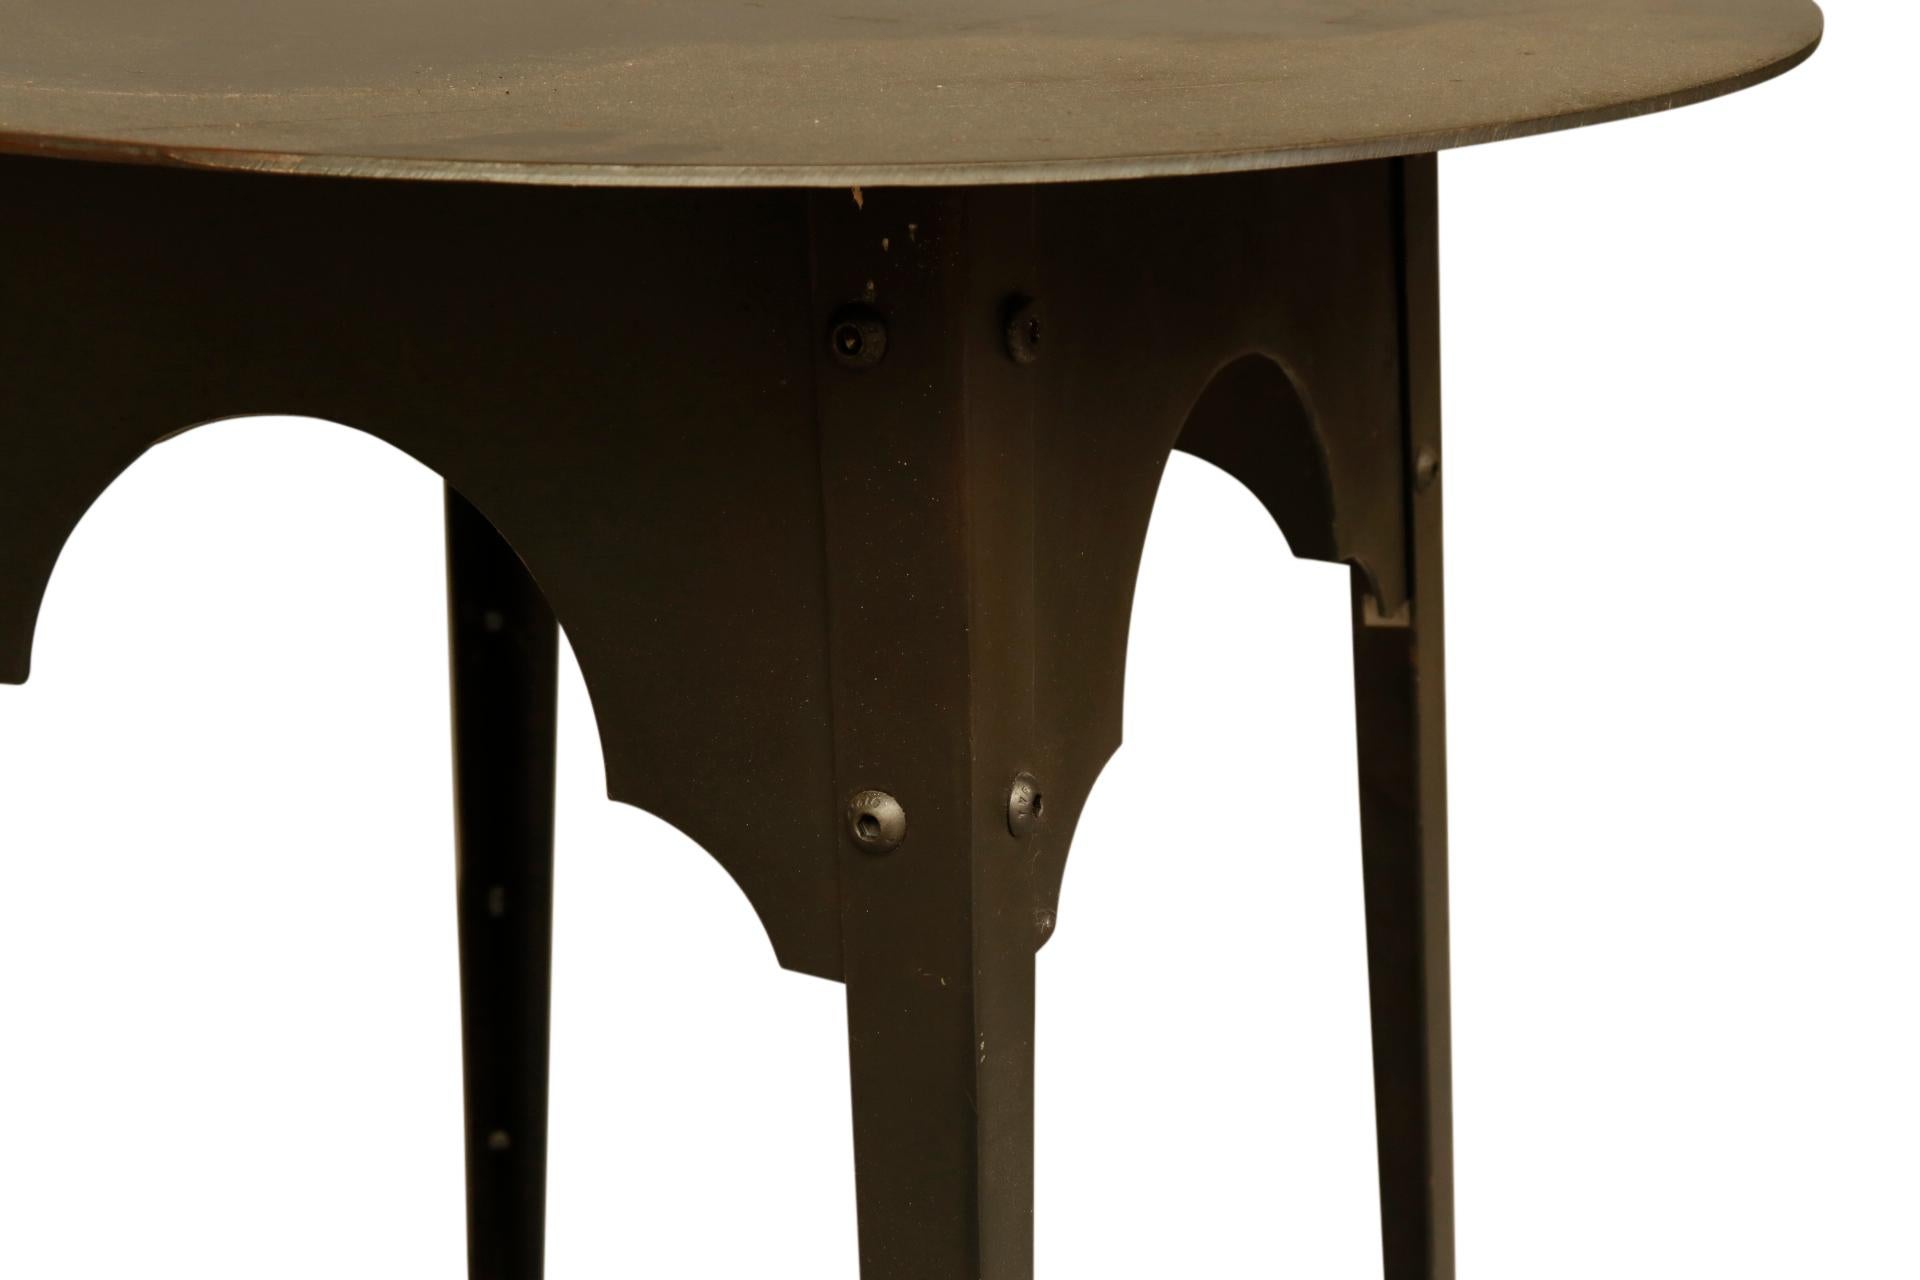 American Contemporary Steel Table with 